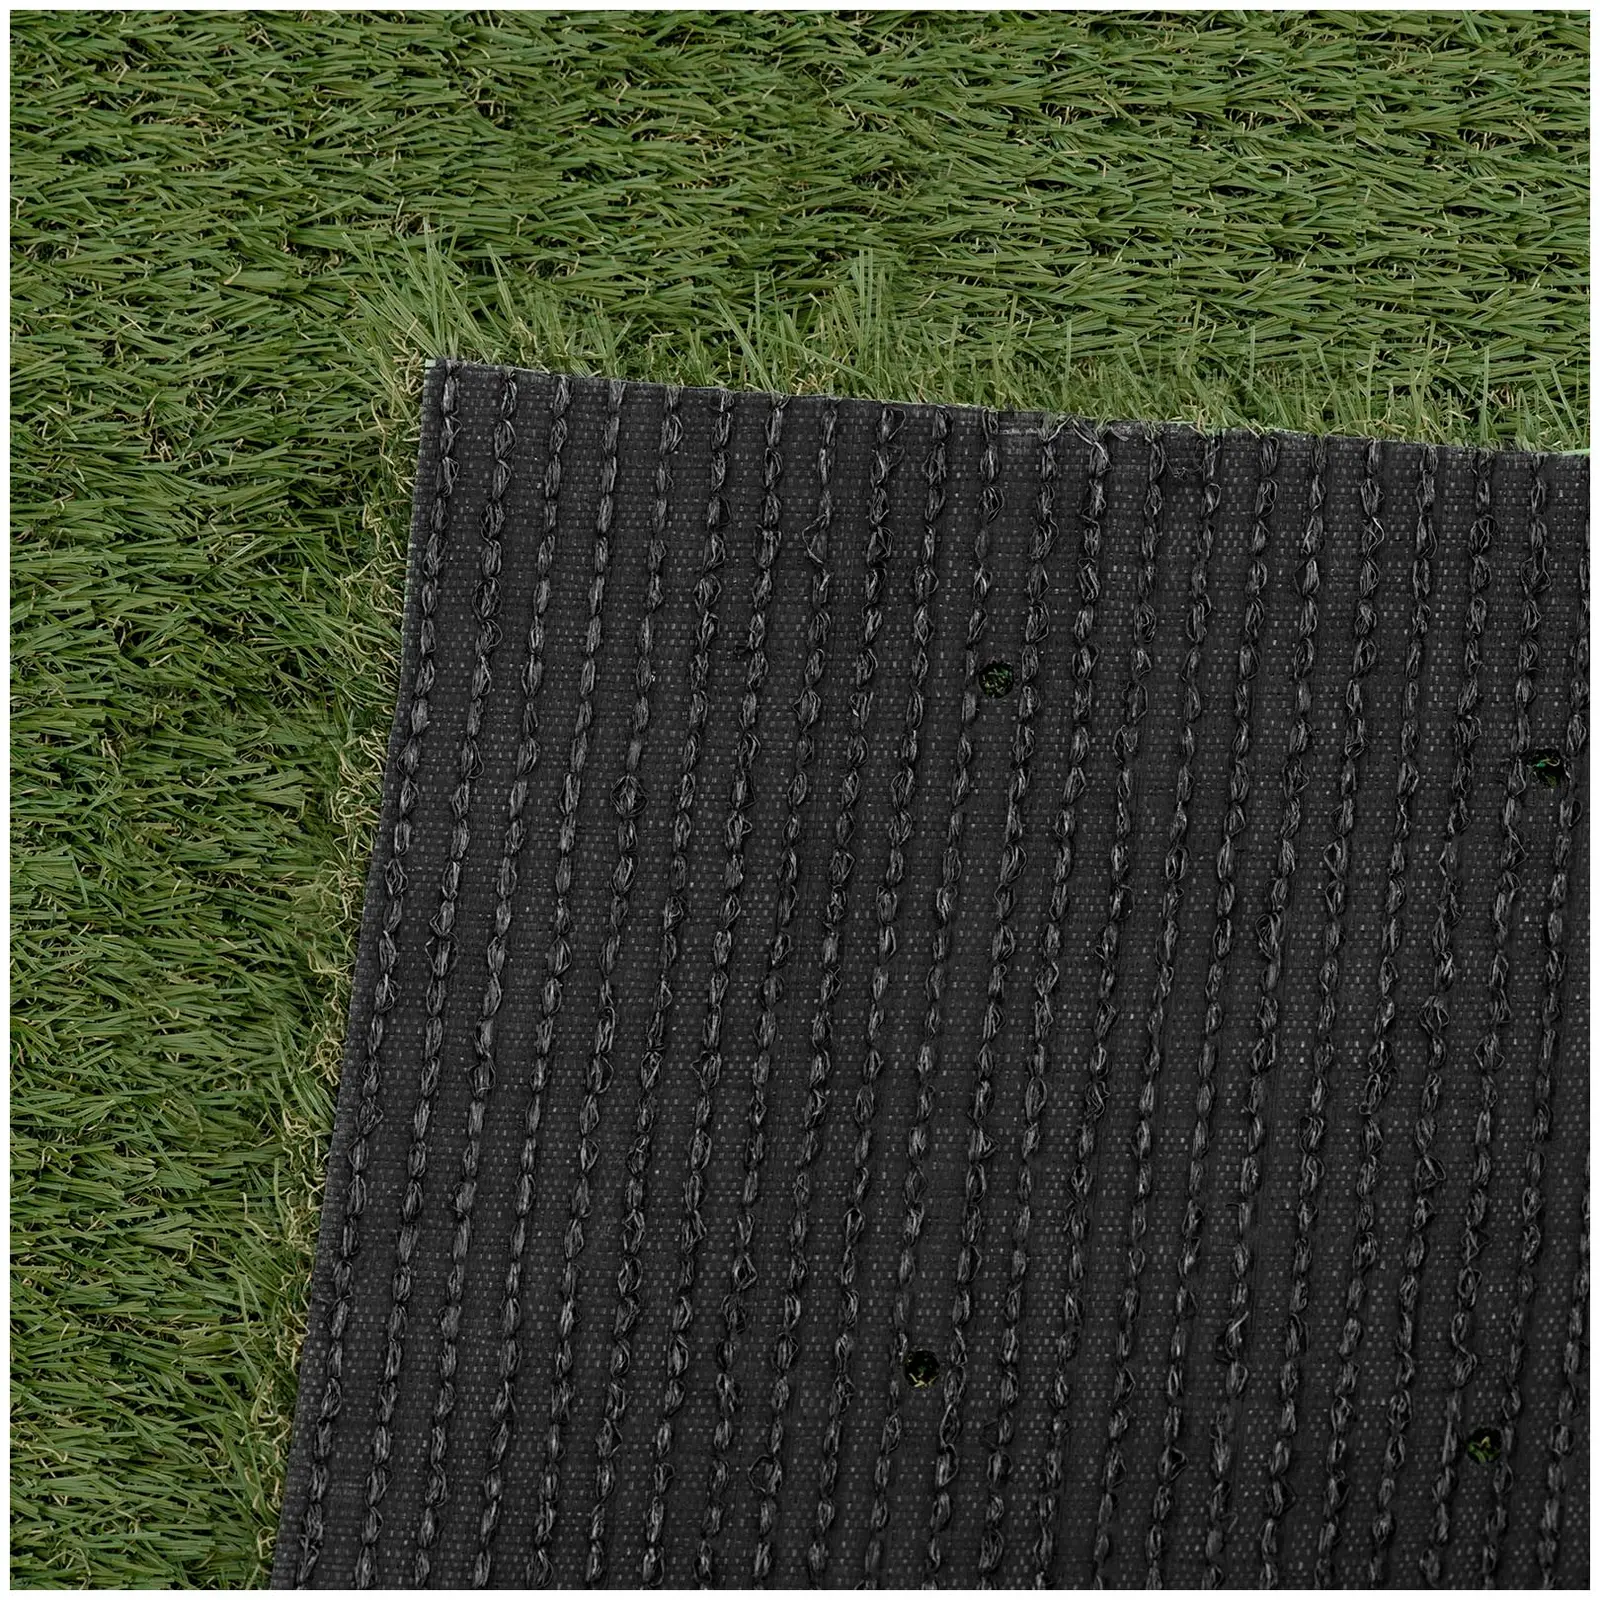 Artificial grass - 200 x 400 cm - Height: 30 mm - Stitch rate: 14/10 cm - UV-resistant